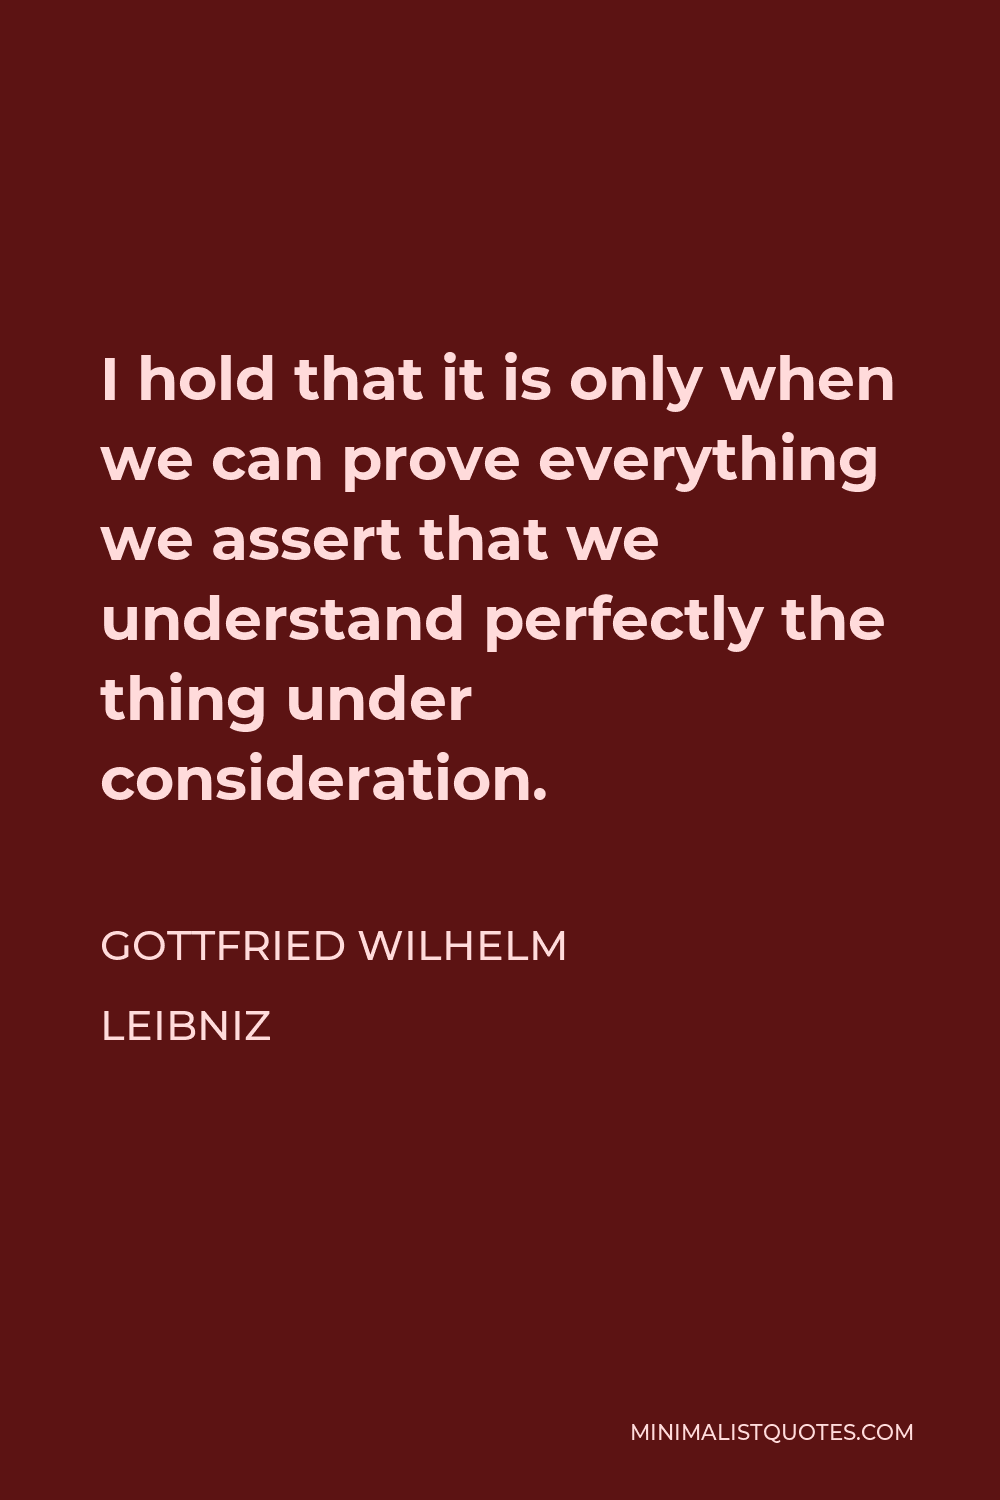 Gottfried Wilhelm Leibniz Quote - I hold that it is only when we can prove everything we assert that we understand perfectly the thing under consideration.